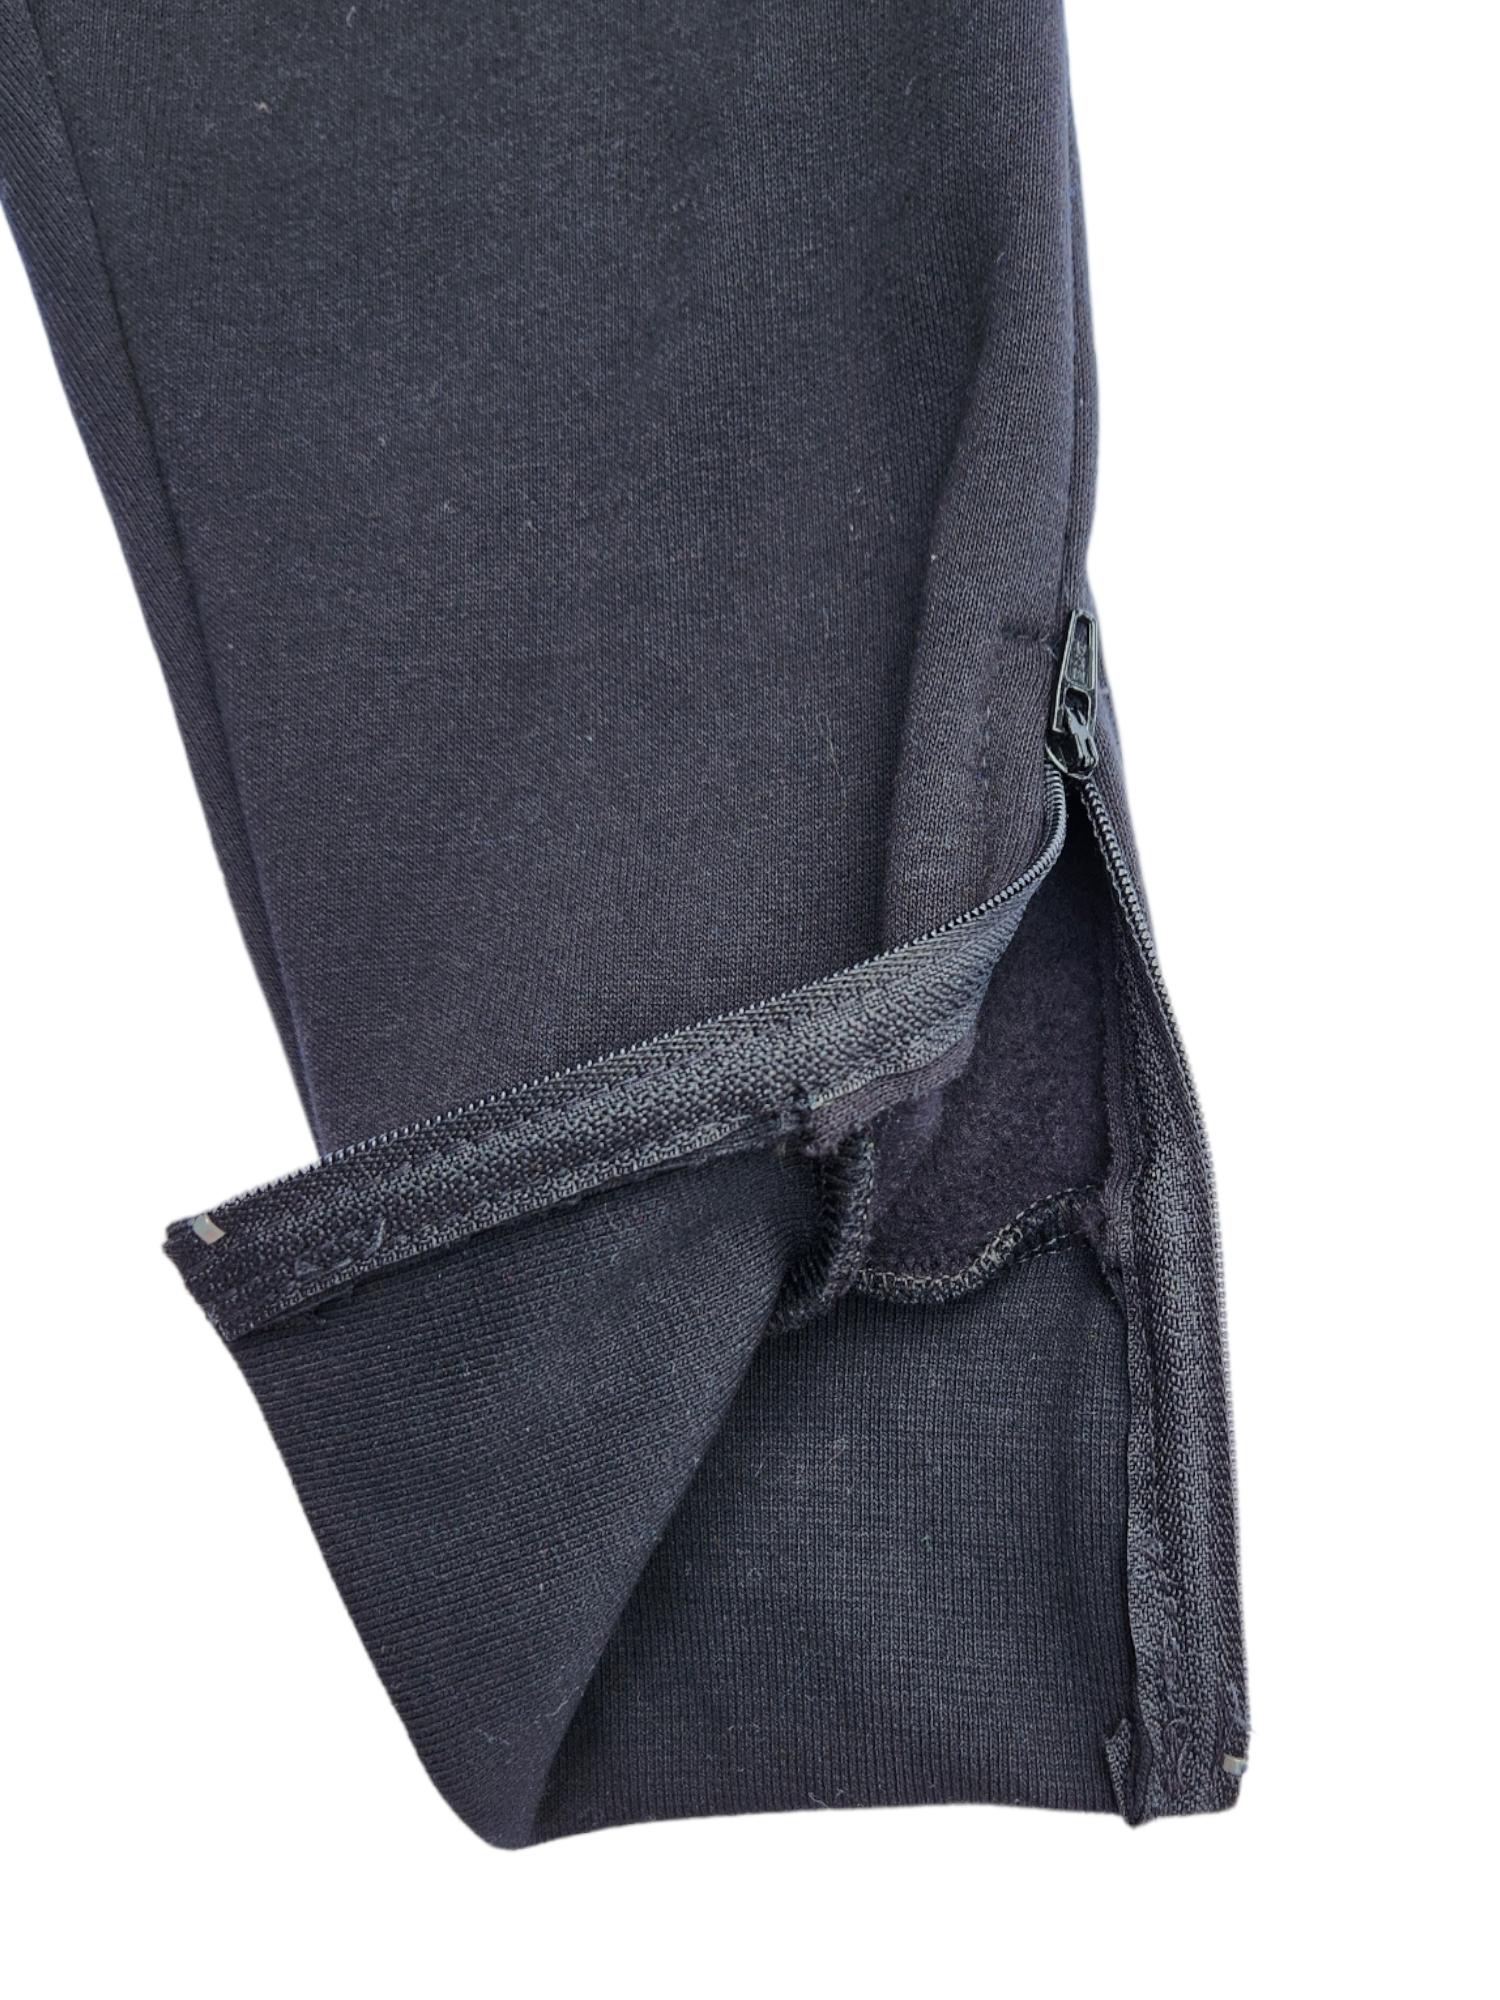 Ankle portion of black track pants featuring zip access